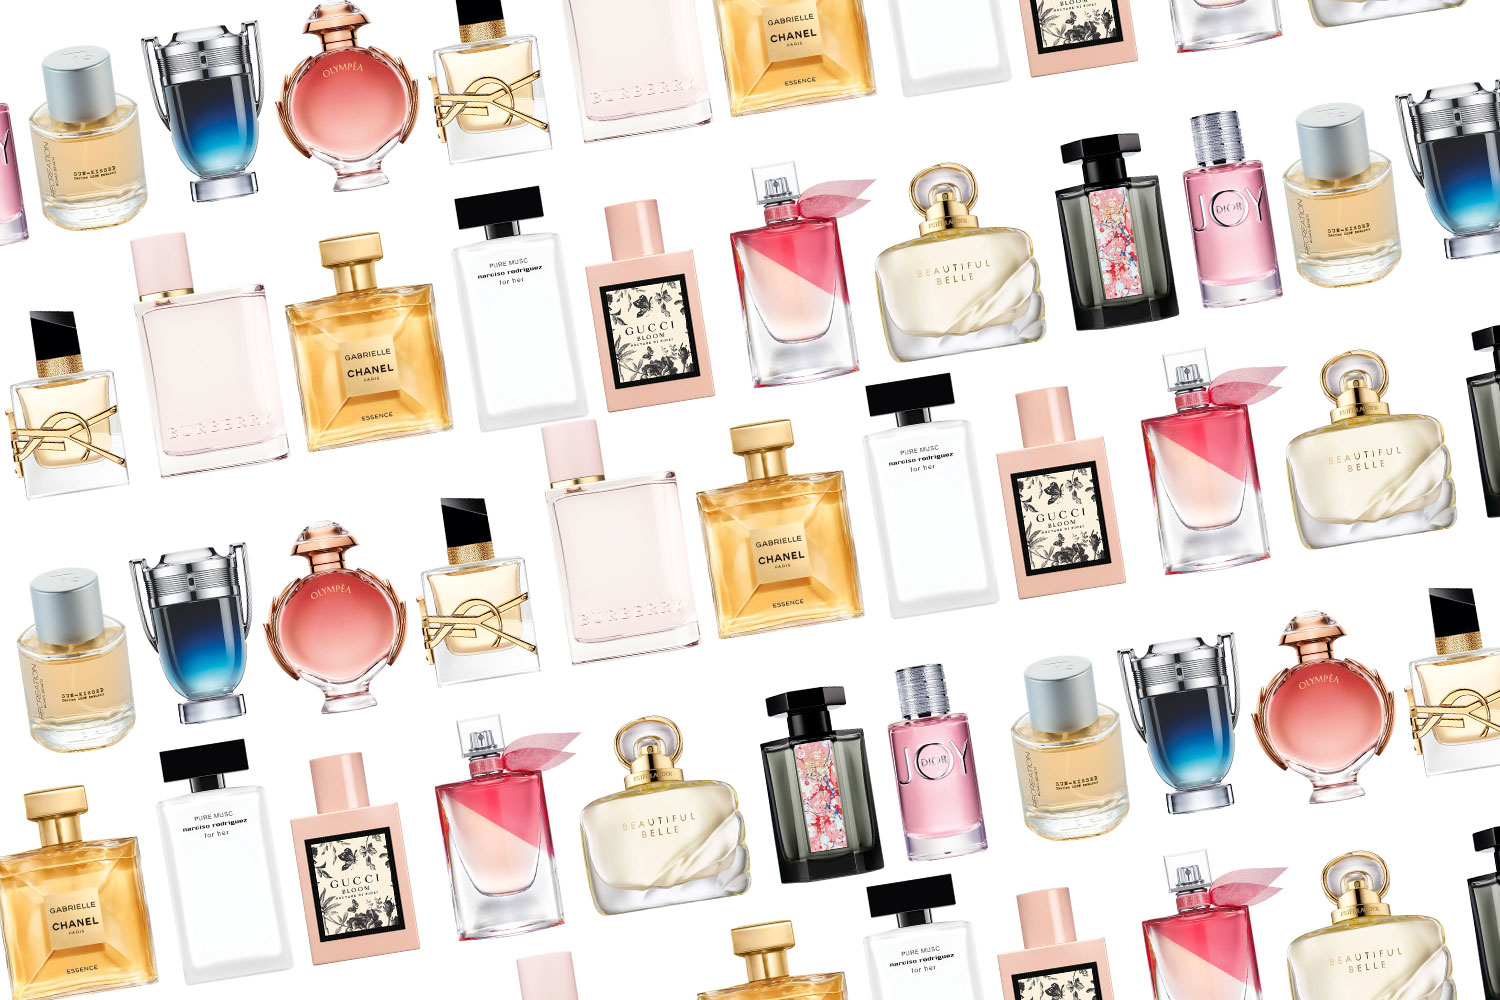 Our Beauty Editors Reveal The Best 11 Fragrances From 2019